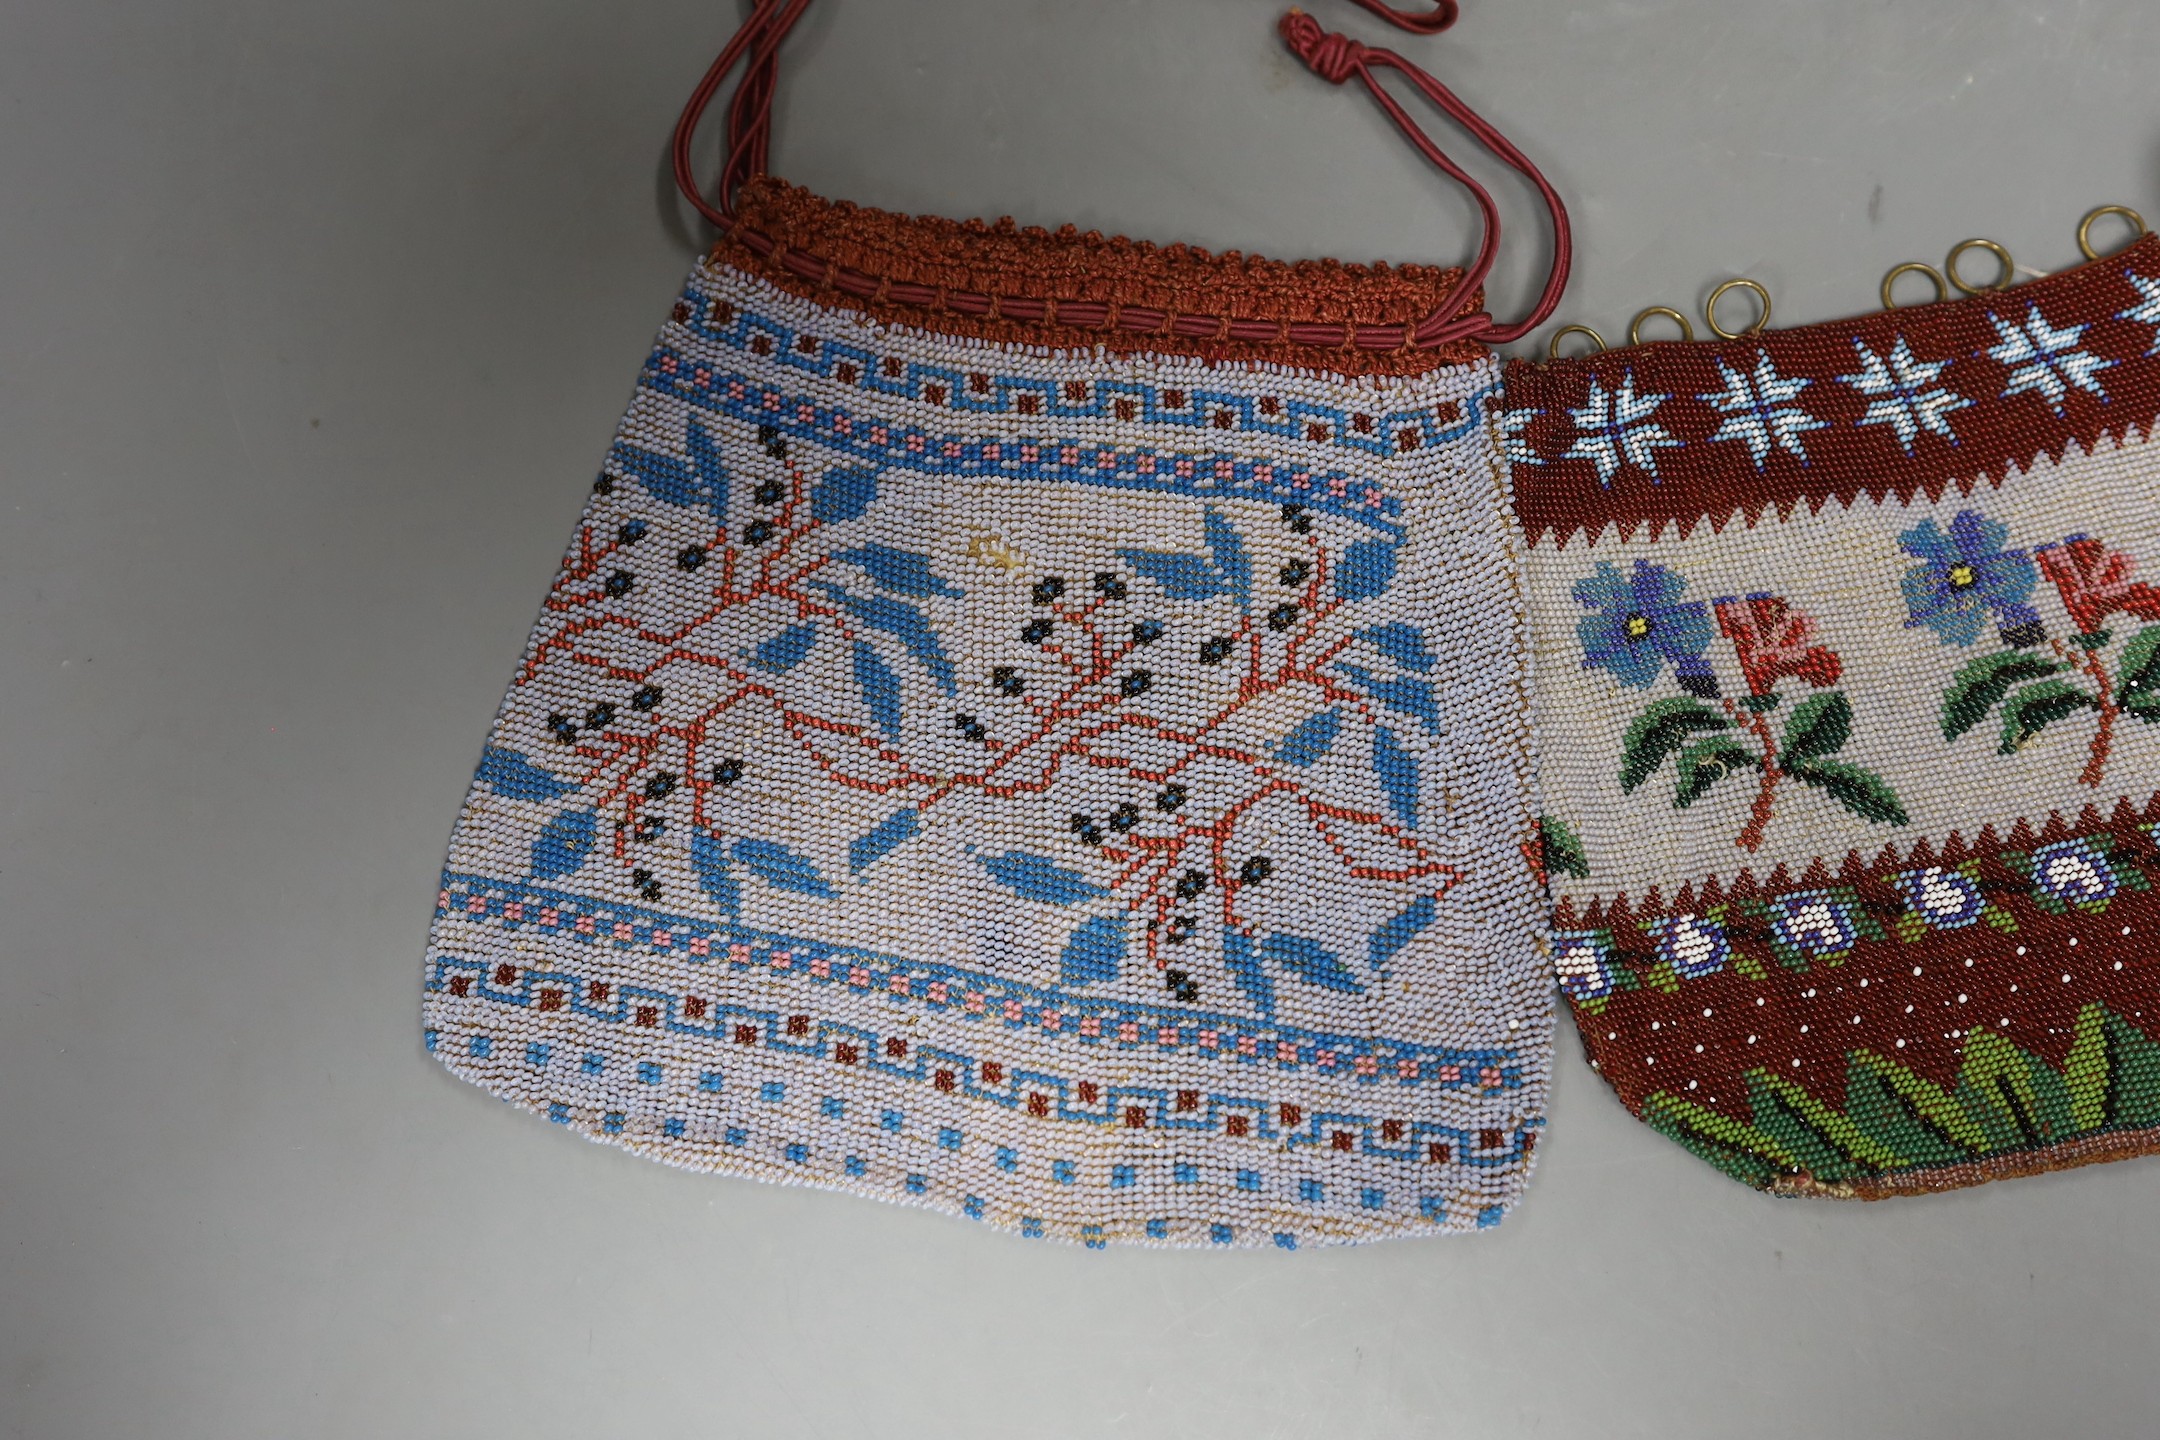 A 19th century bead worked bag with sailing ship design, a similar floral bead worked bag and a 1920’s-30’s abstract bead worked bag